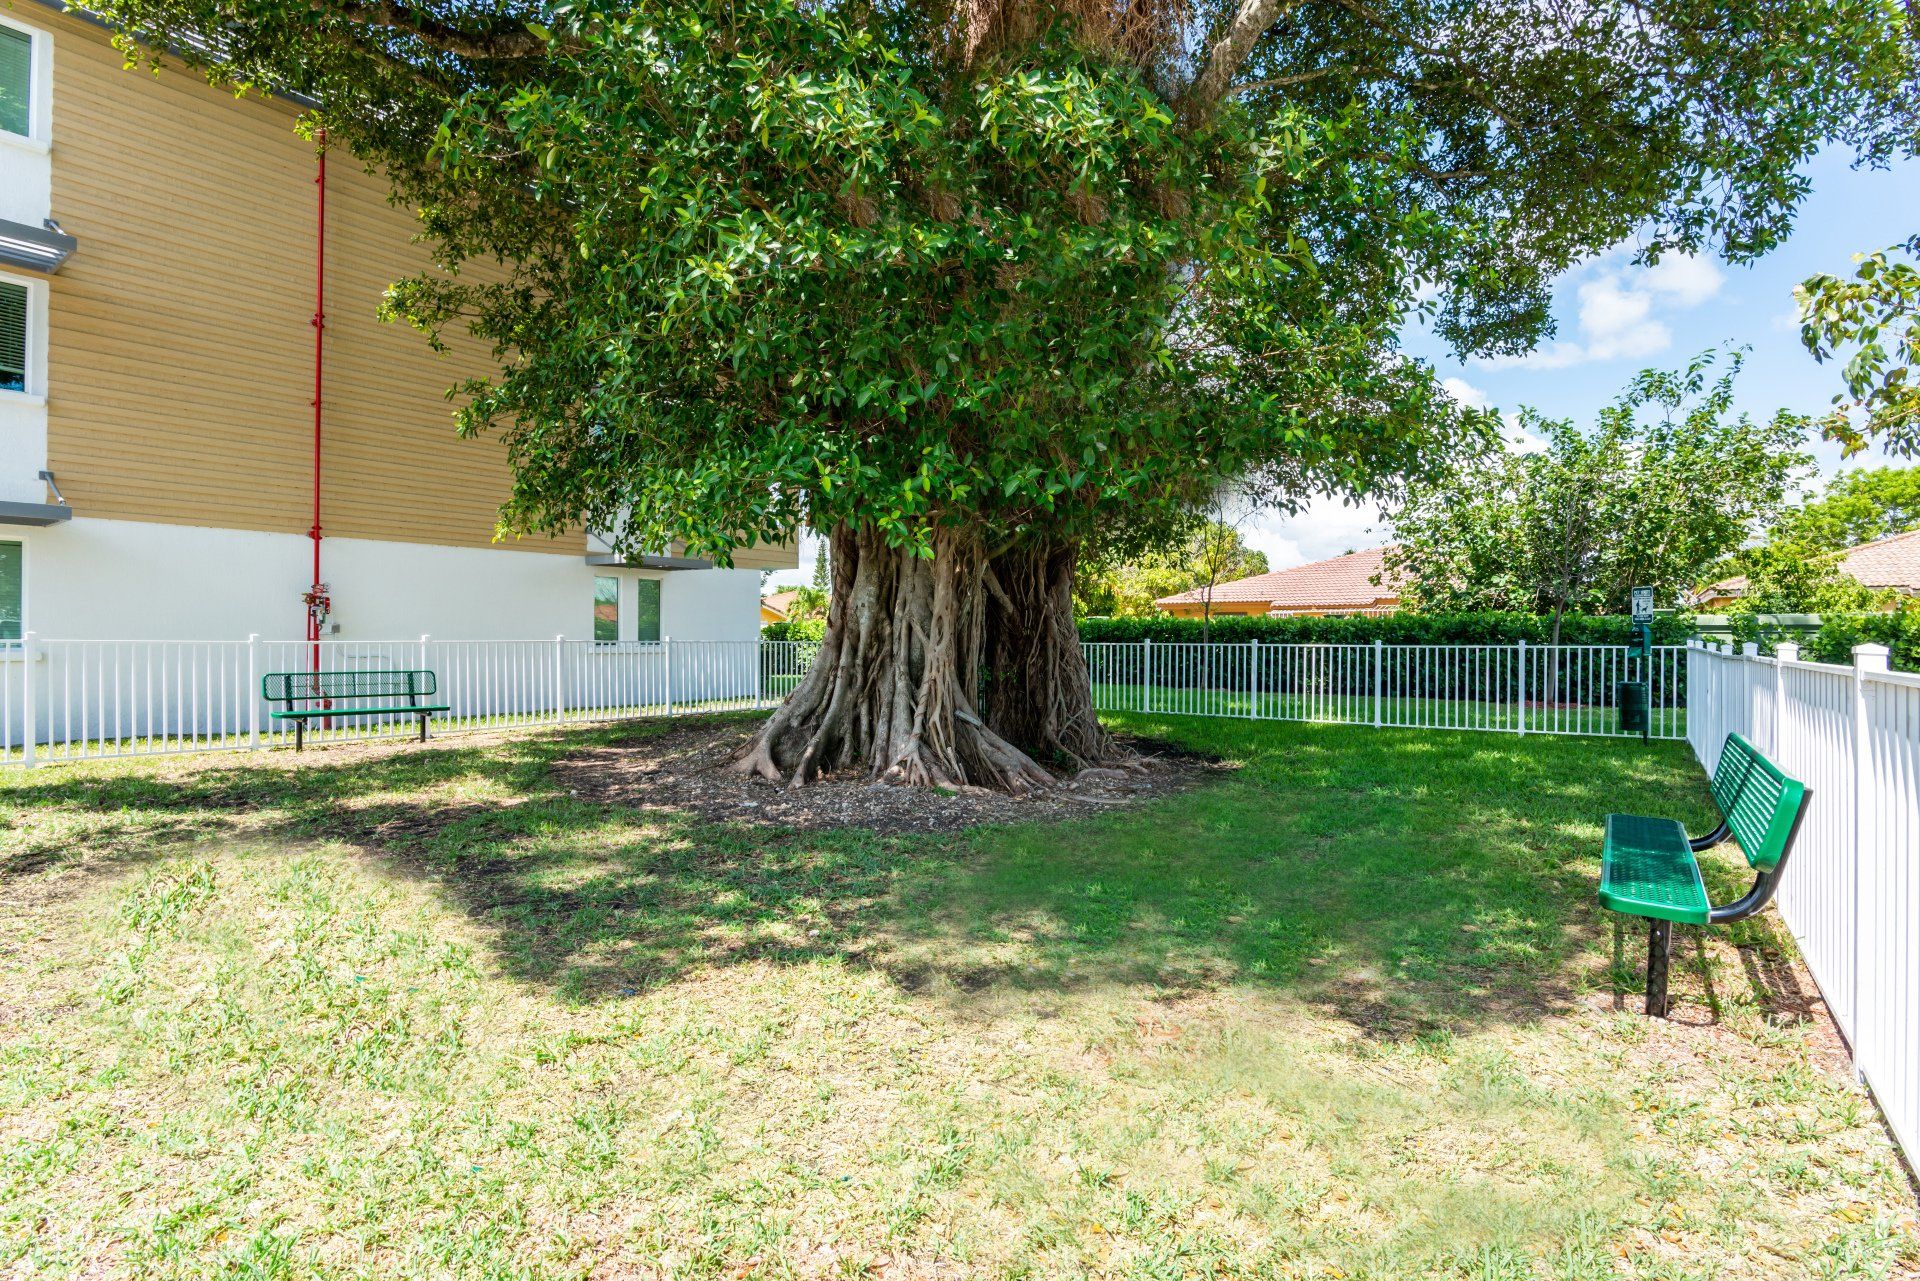 Tree outdoors at Sophia Square Apartments in Homestead, FL.